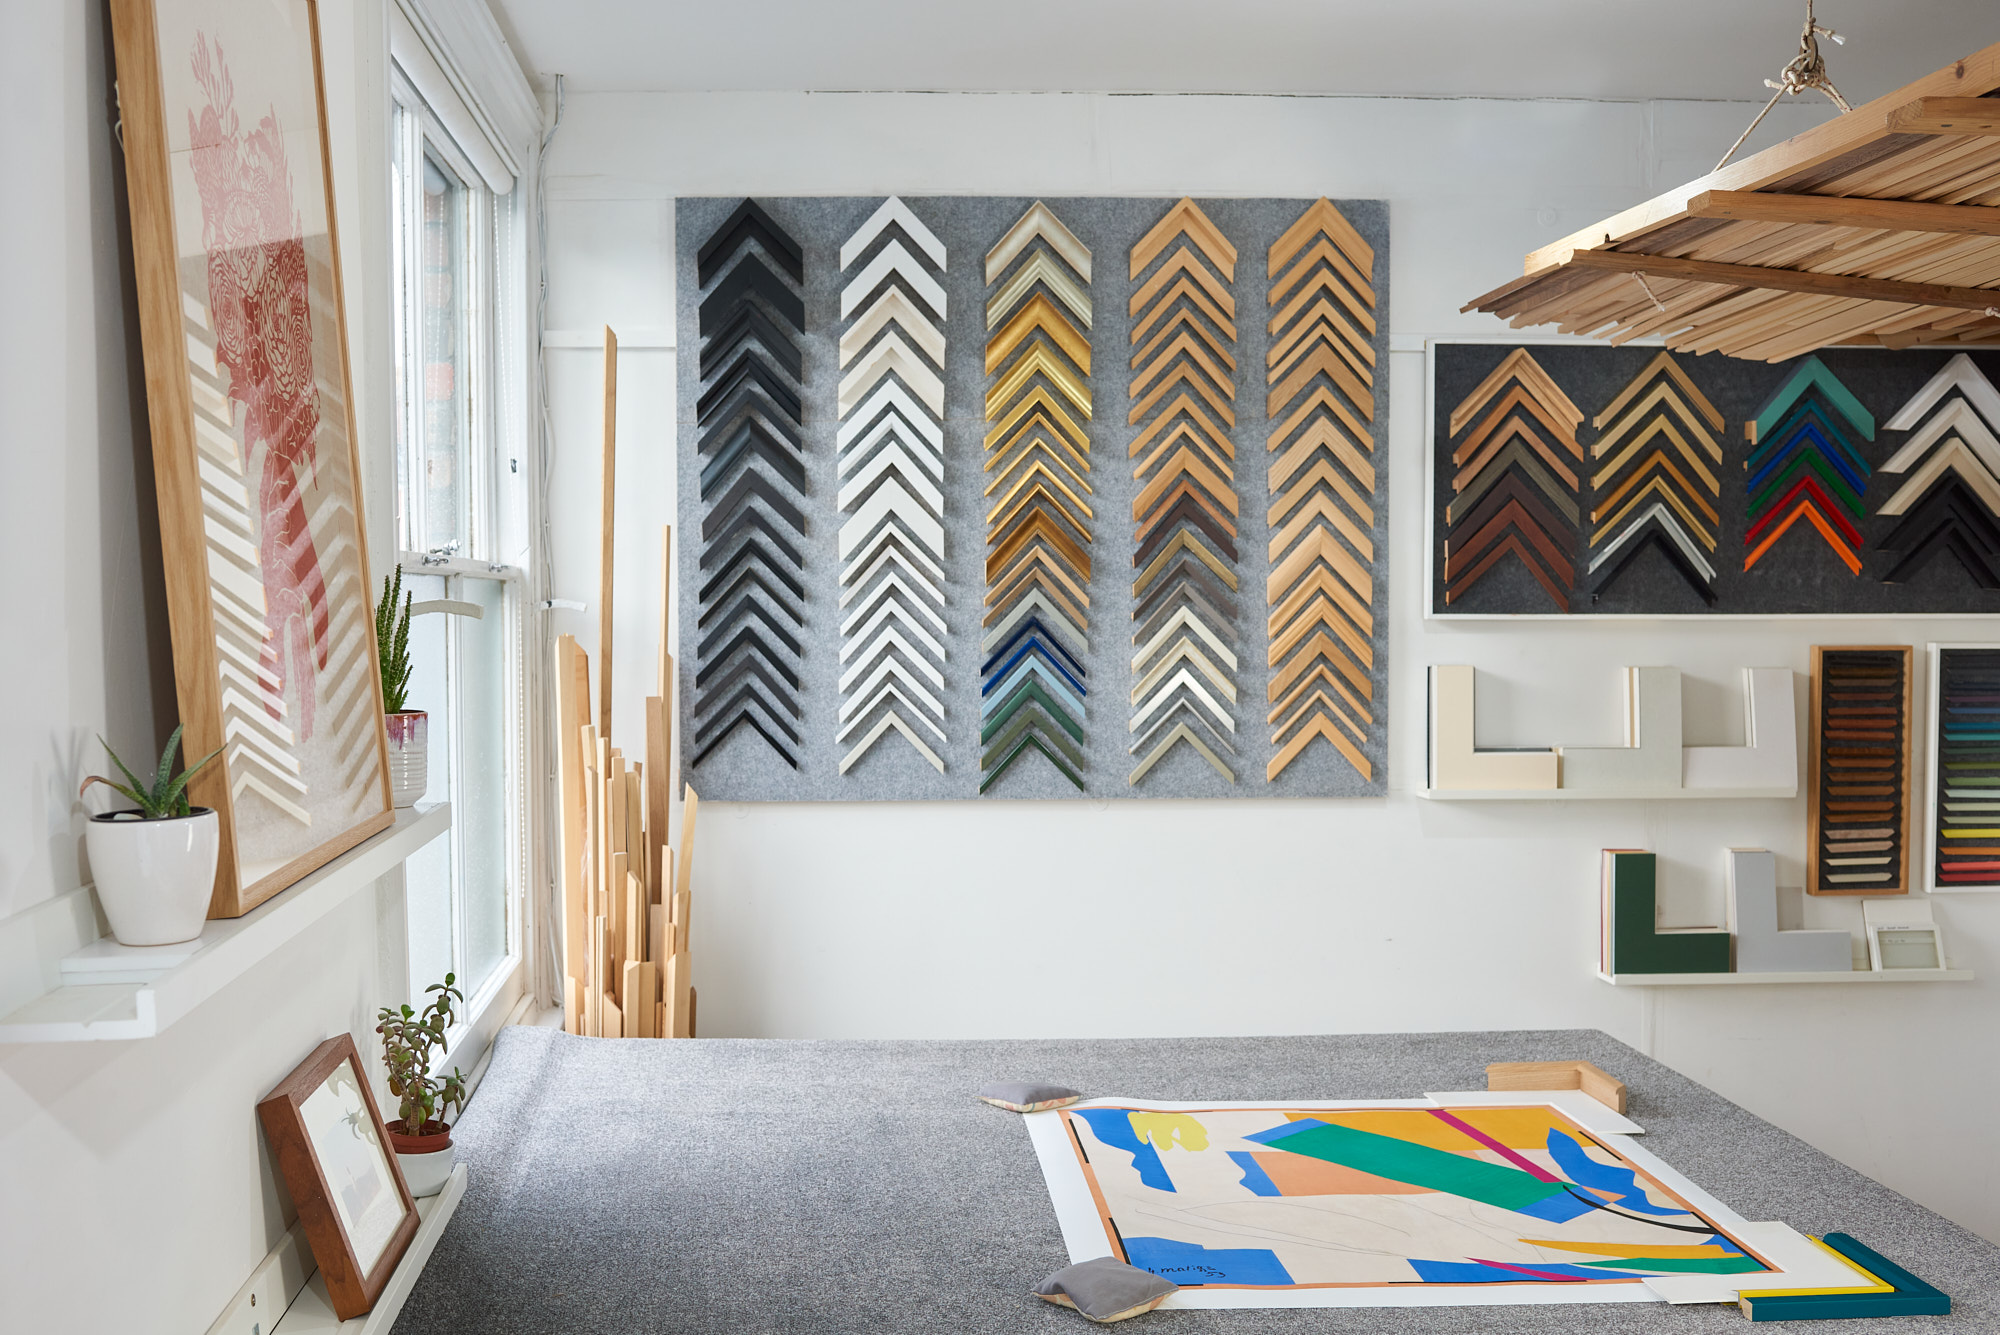 photograph of workshop scene with frame chevrons on back wall and grey carpeted bench